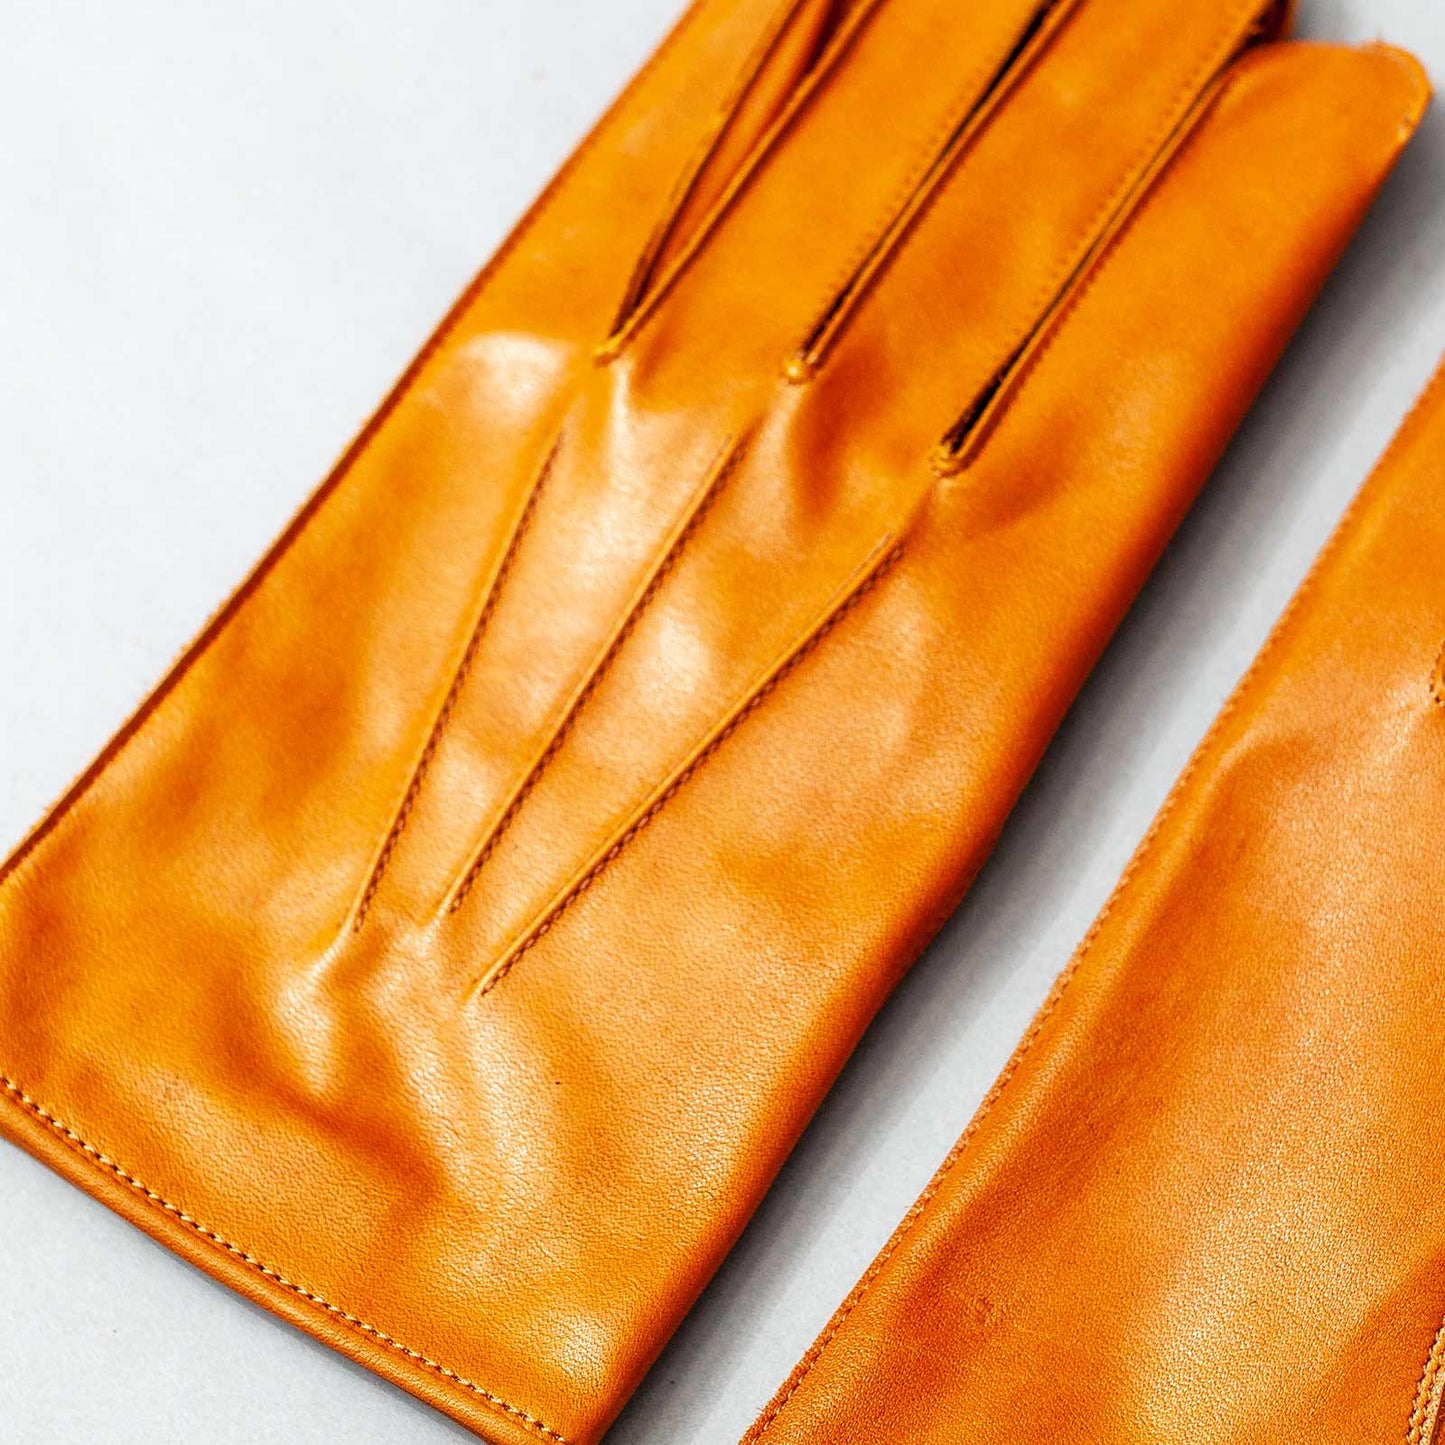 WASHABLE LEATER GLOVE-[BUSINESS]